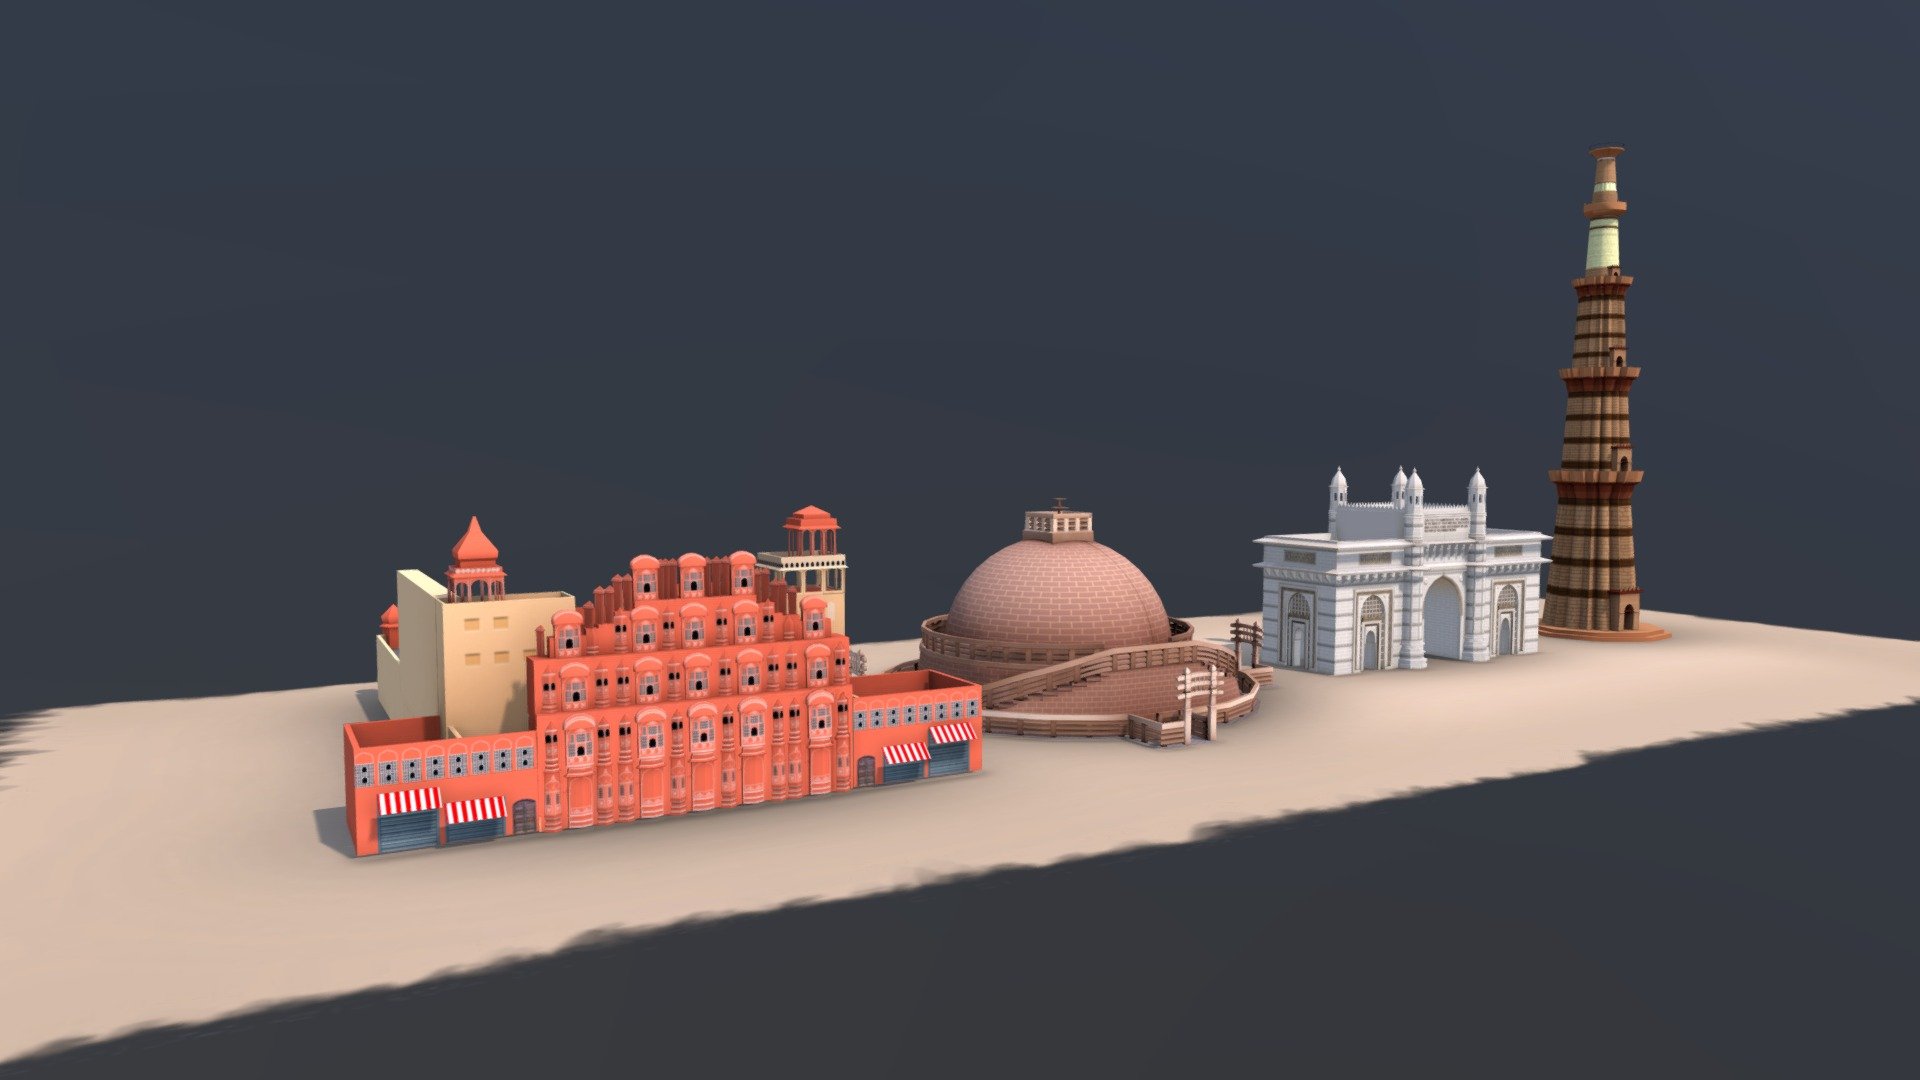 India Mounuments with hand painted texture.
Qutub minar.
Gate ways of india
Sanchi stupa.
hawa mahal.
Please let me know if you want to buy any of these 3d model